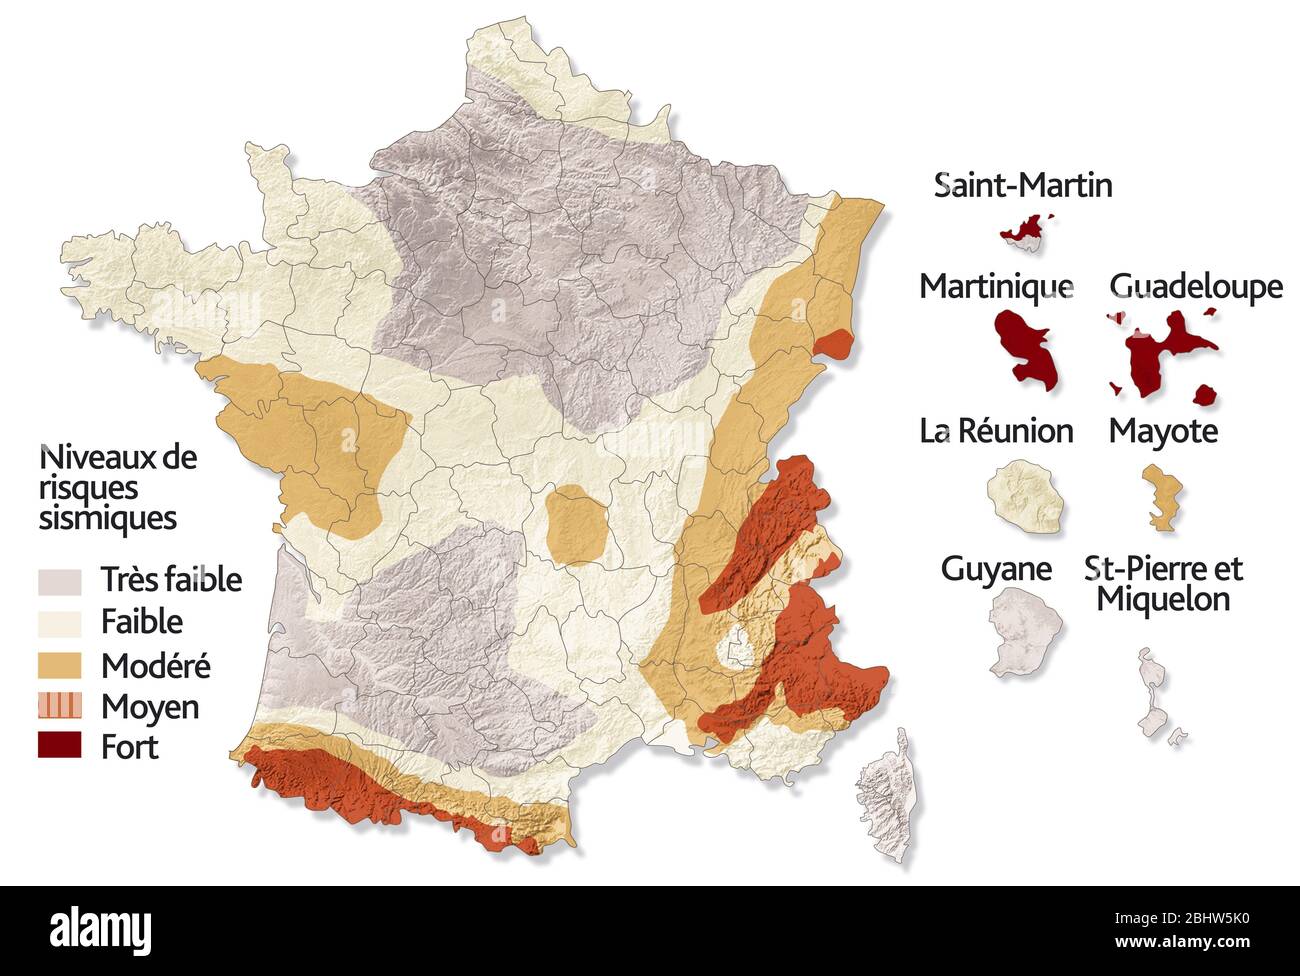 Levels of seismic risks on france Stock Photo